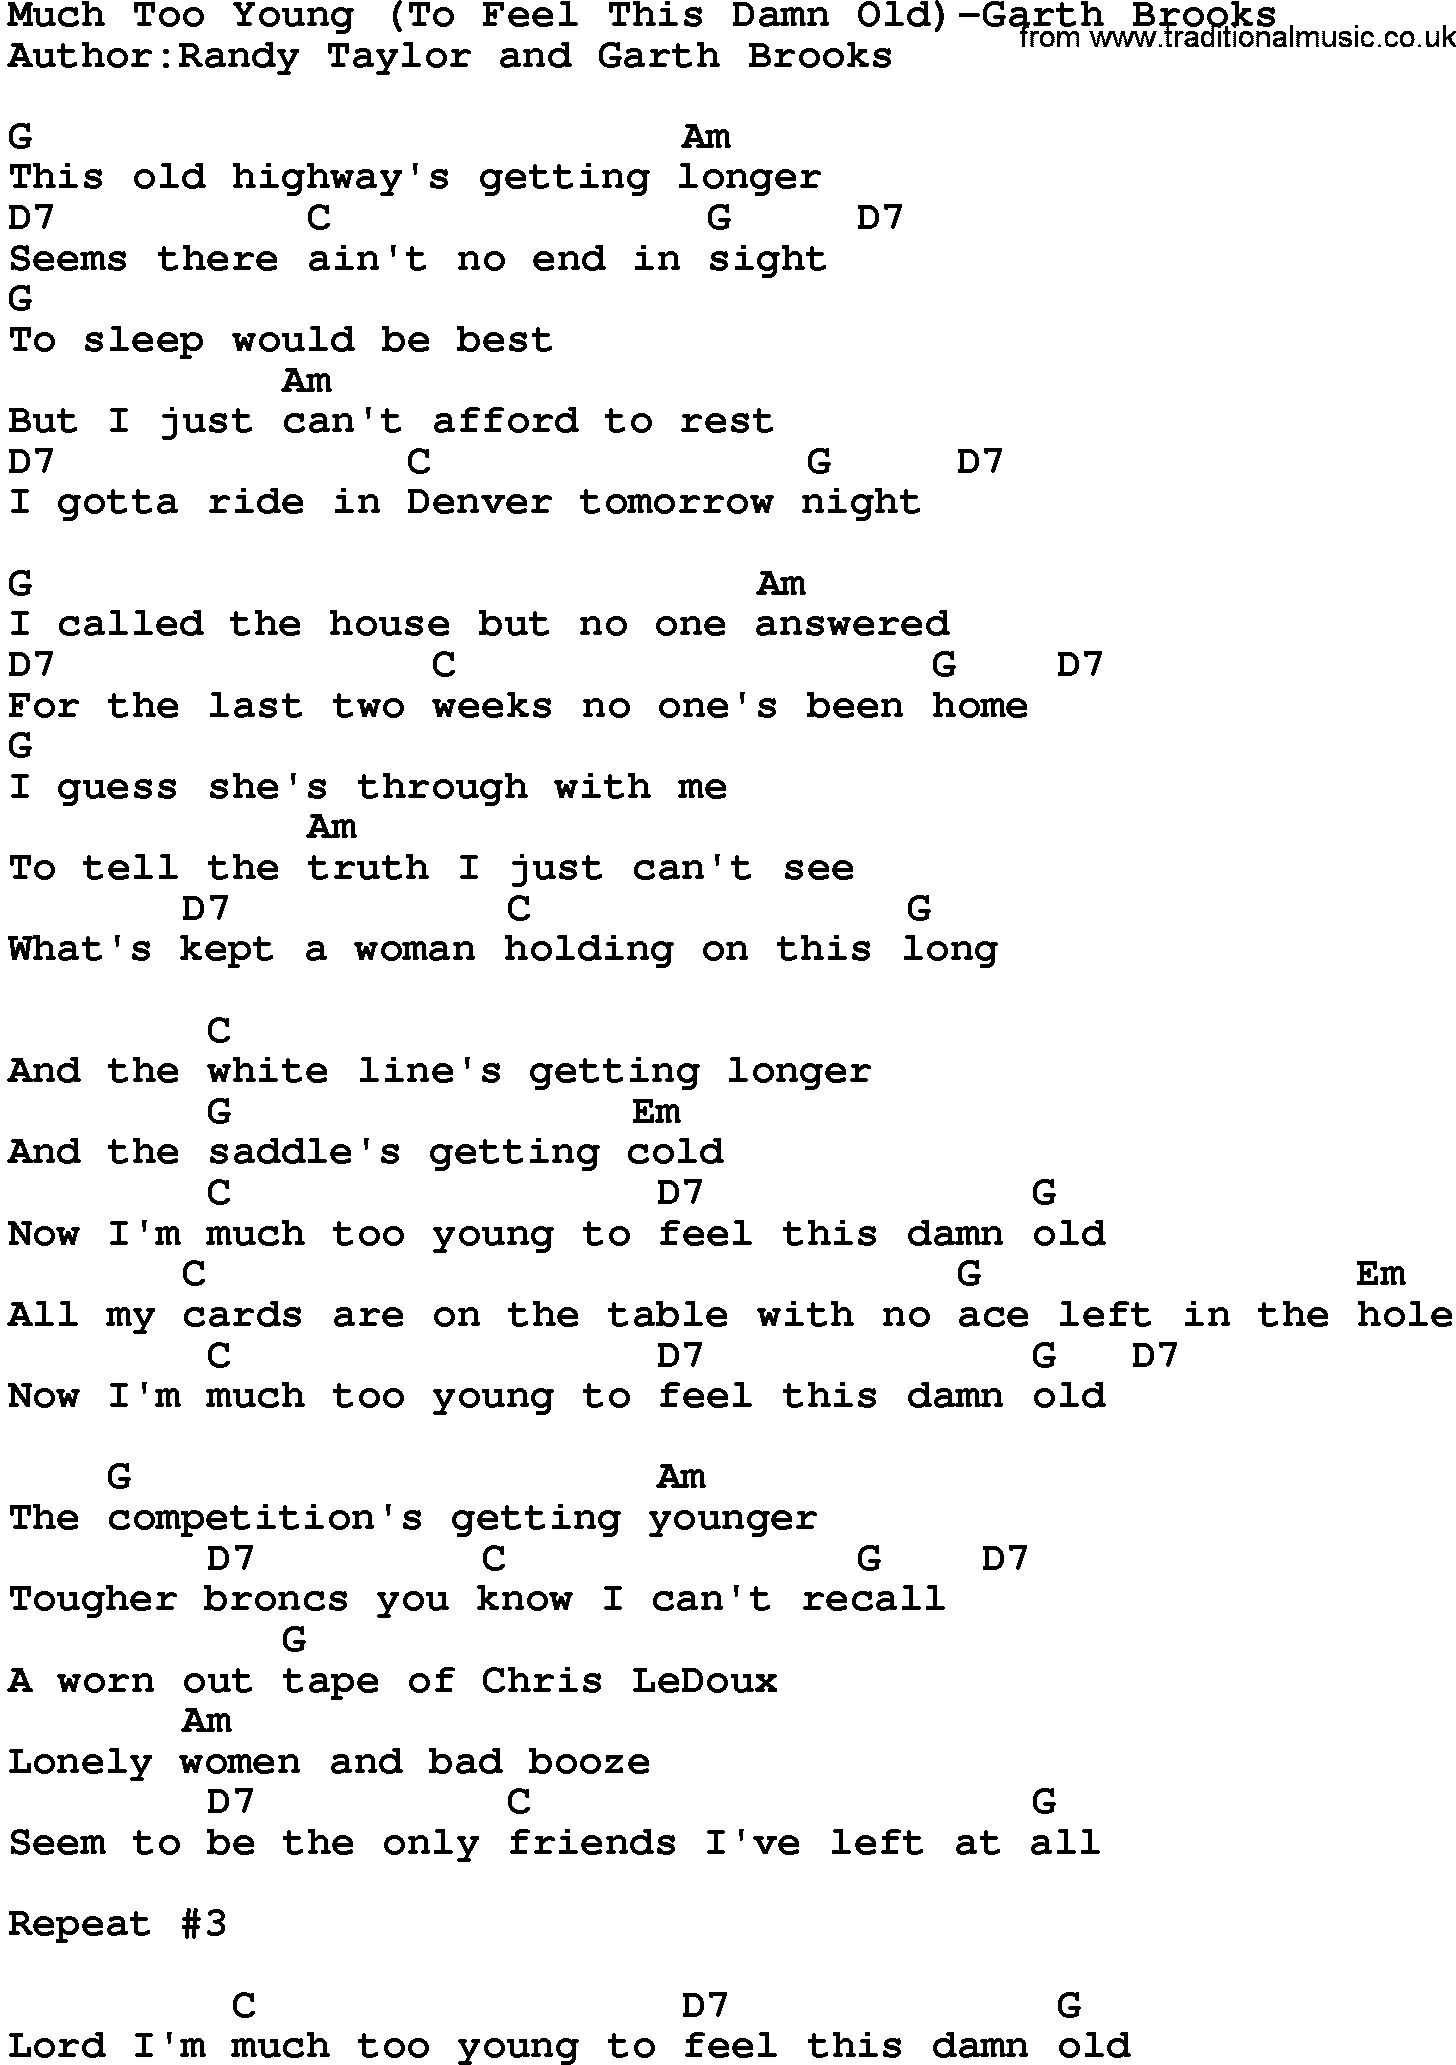 Country music song: Much Too Young(To Feel This Damn Old)-Garth Brooks lyrics and chords